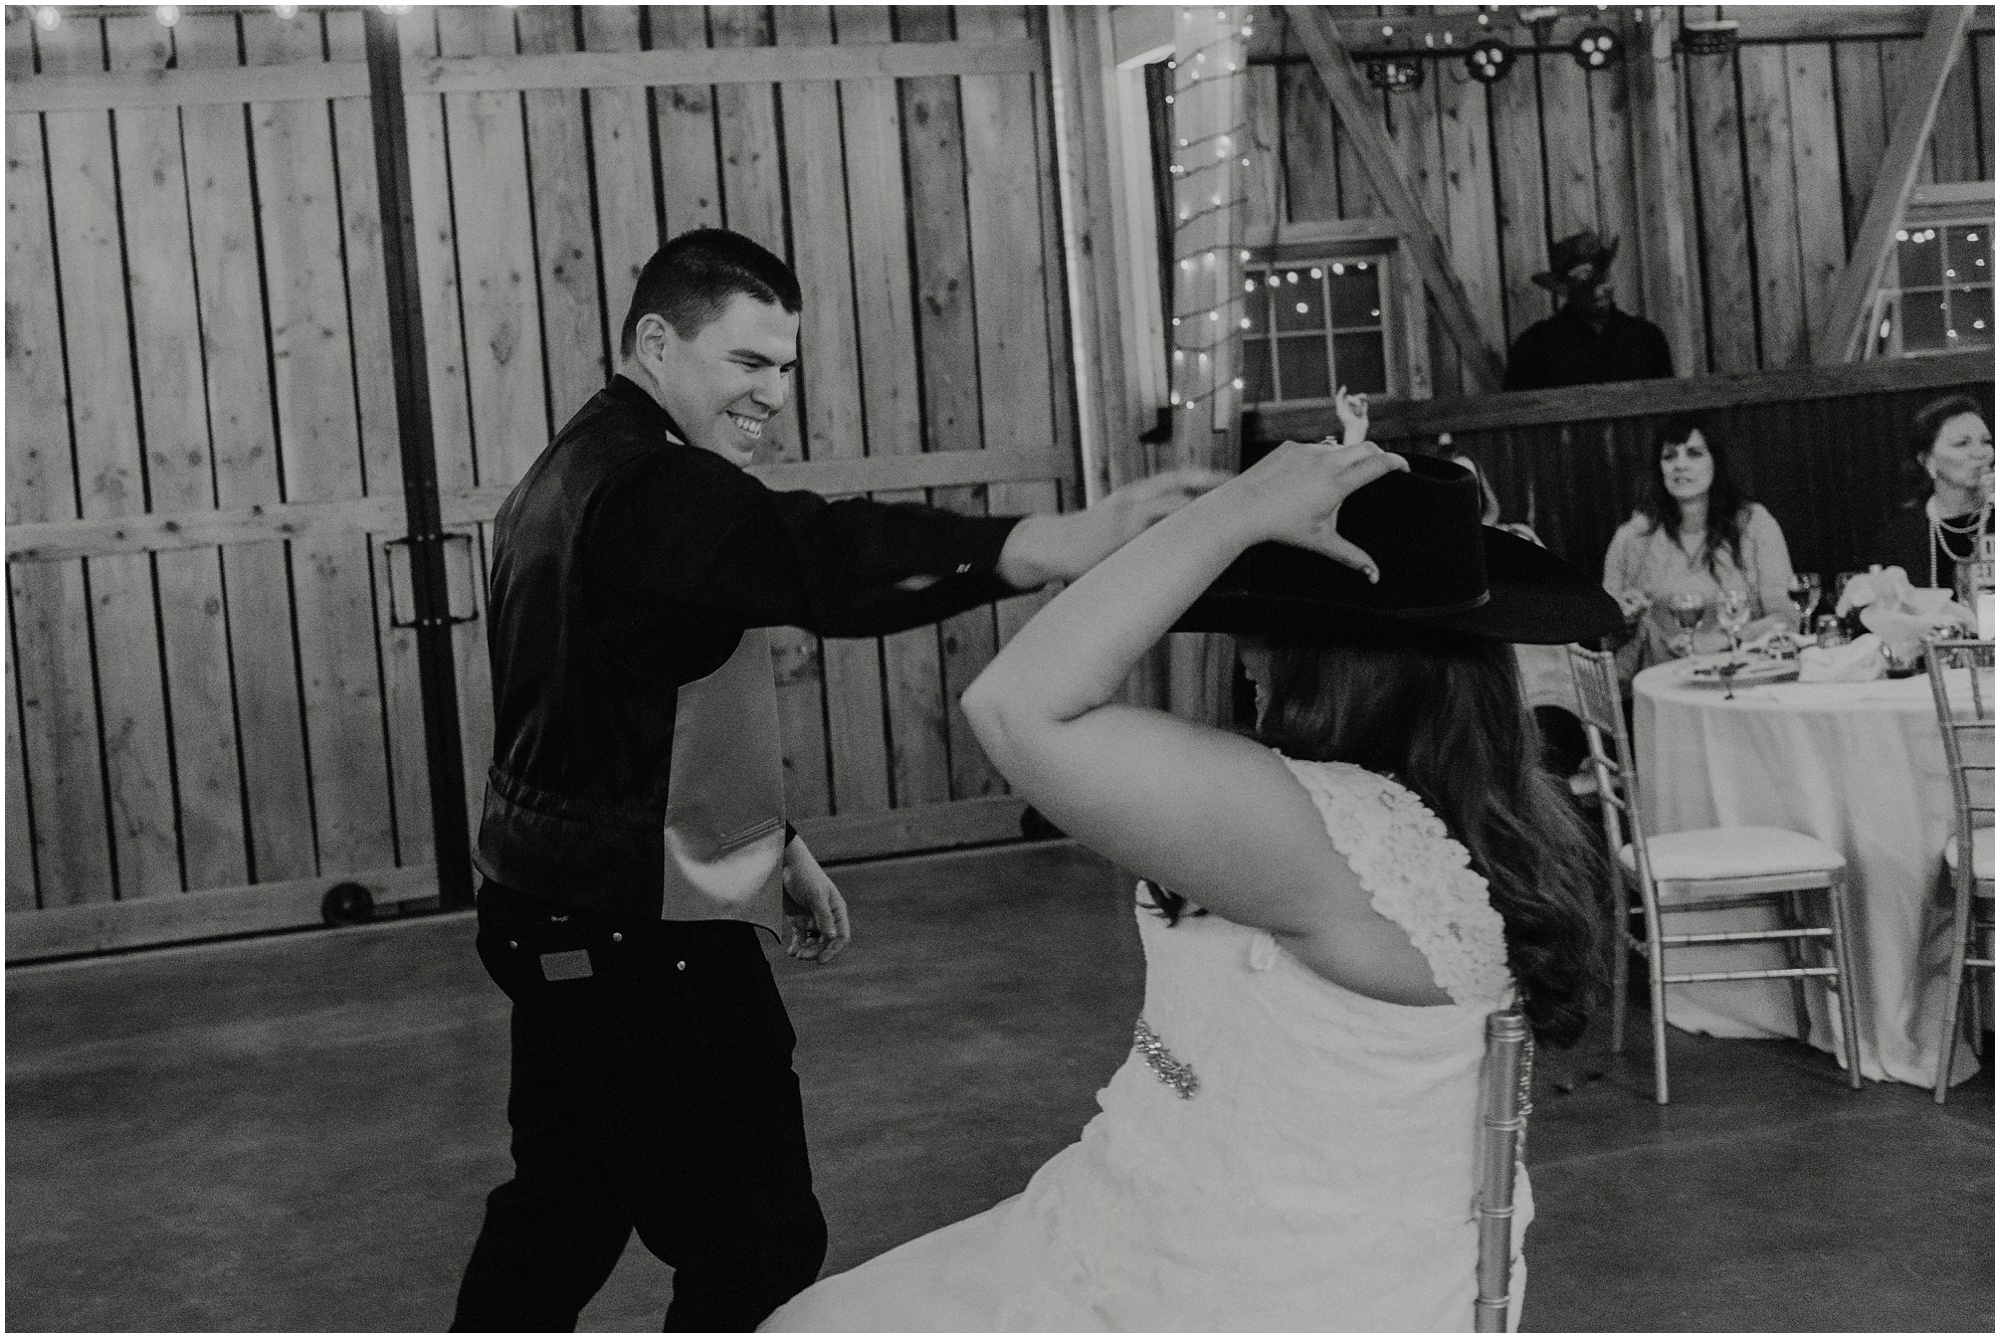 Groom places his cowboy hat on his bride during the garter toss.